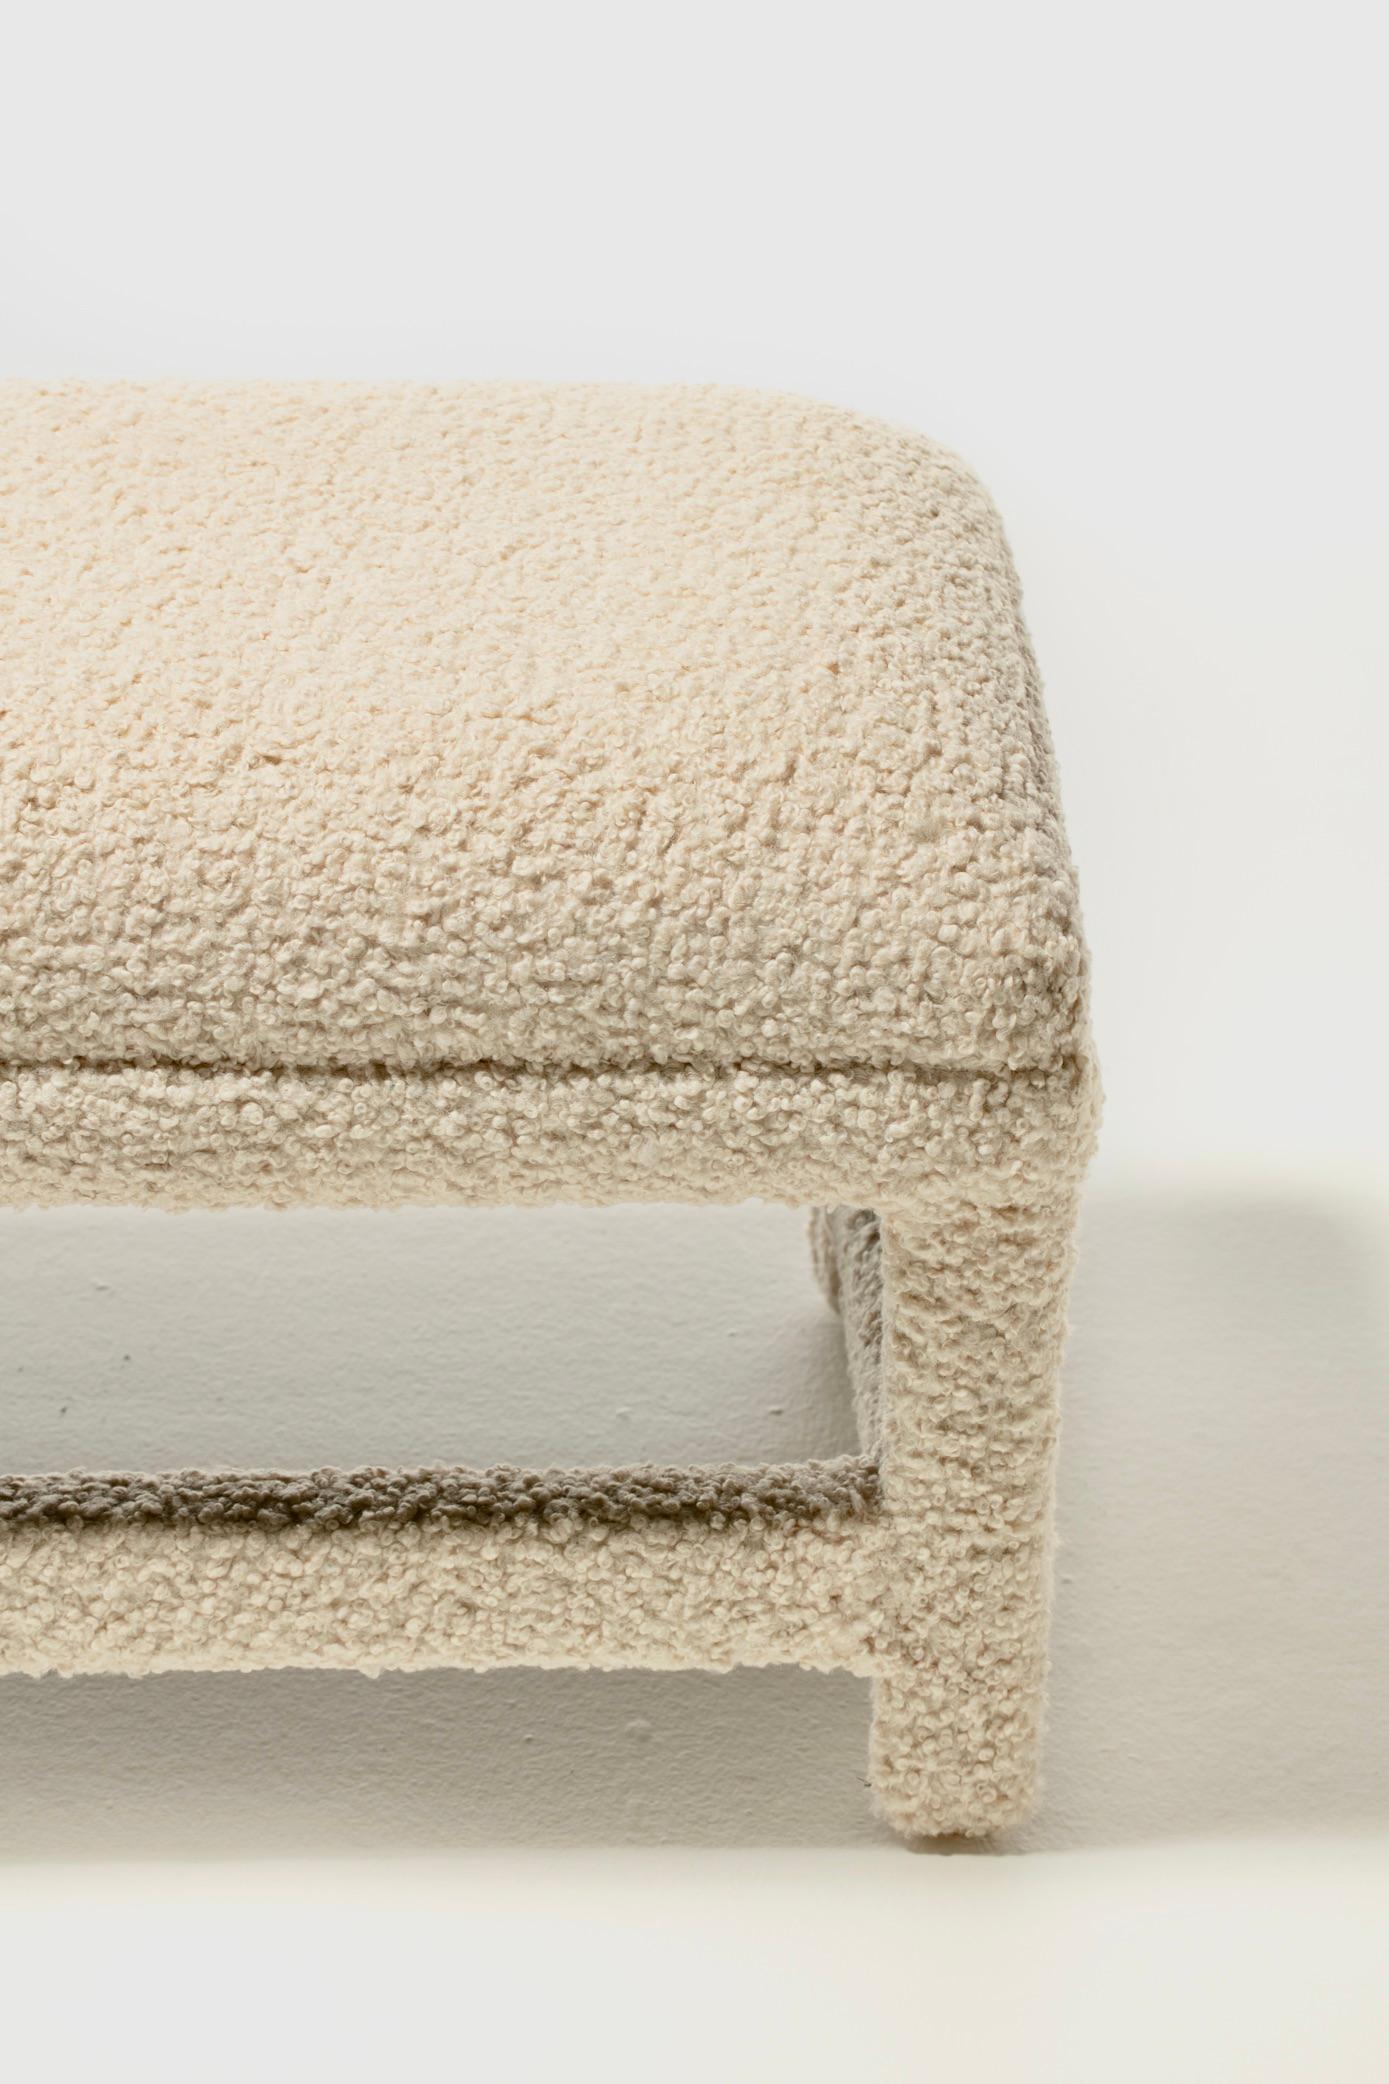 Post Modern Milo Baughman Parsons Style Bench in Ivory White Bouclé, circa 1980s For Sale 4